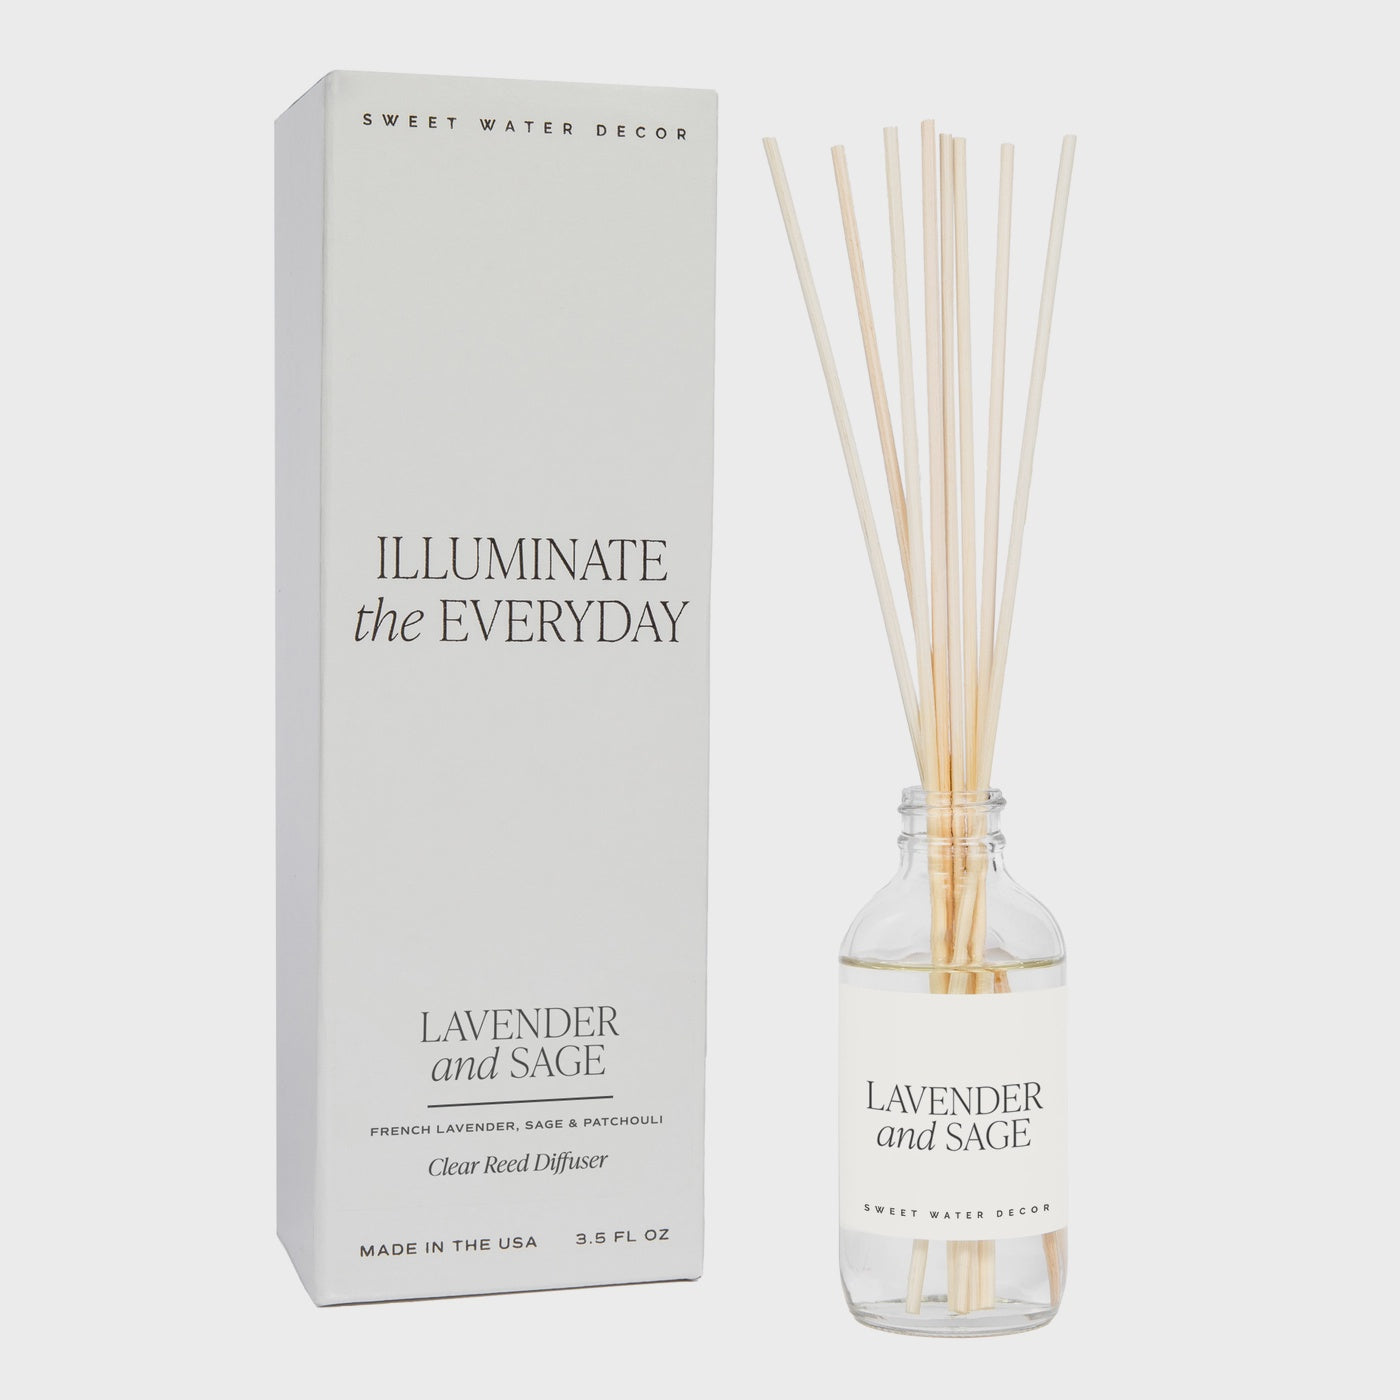 The Lavender &amp; Sage Reed Diffuser